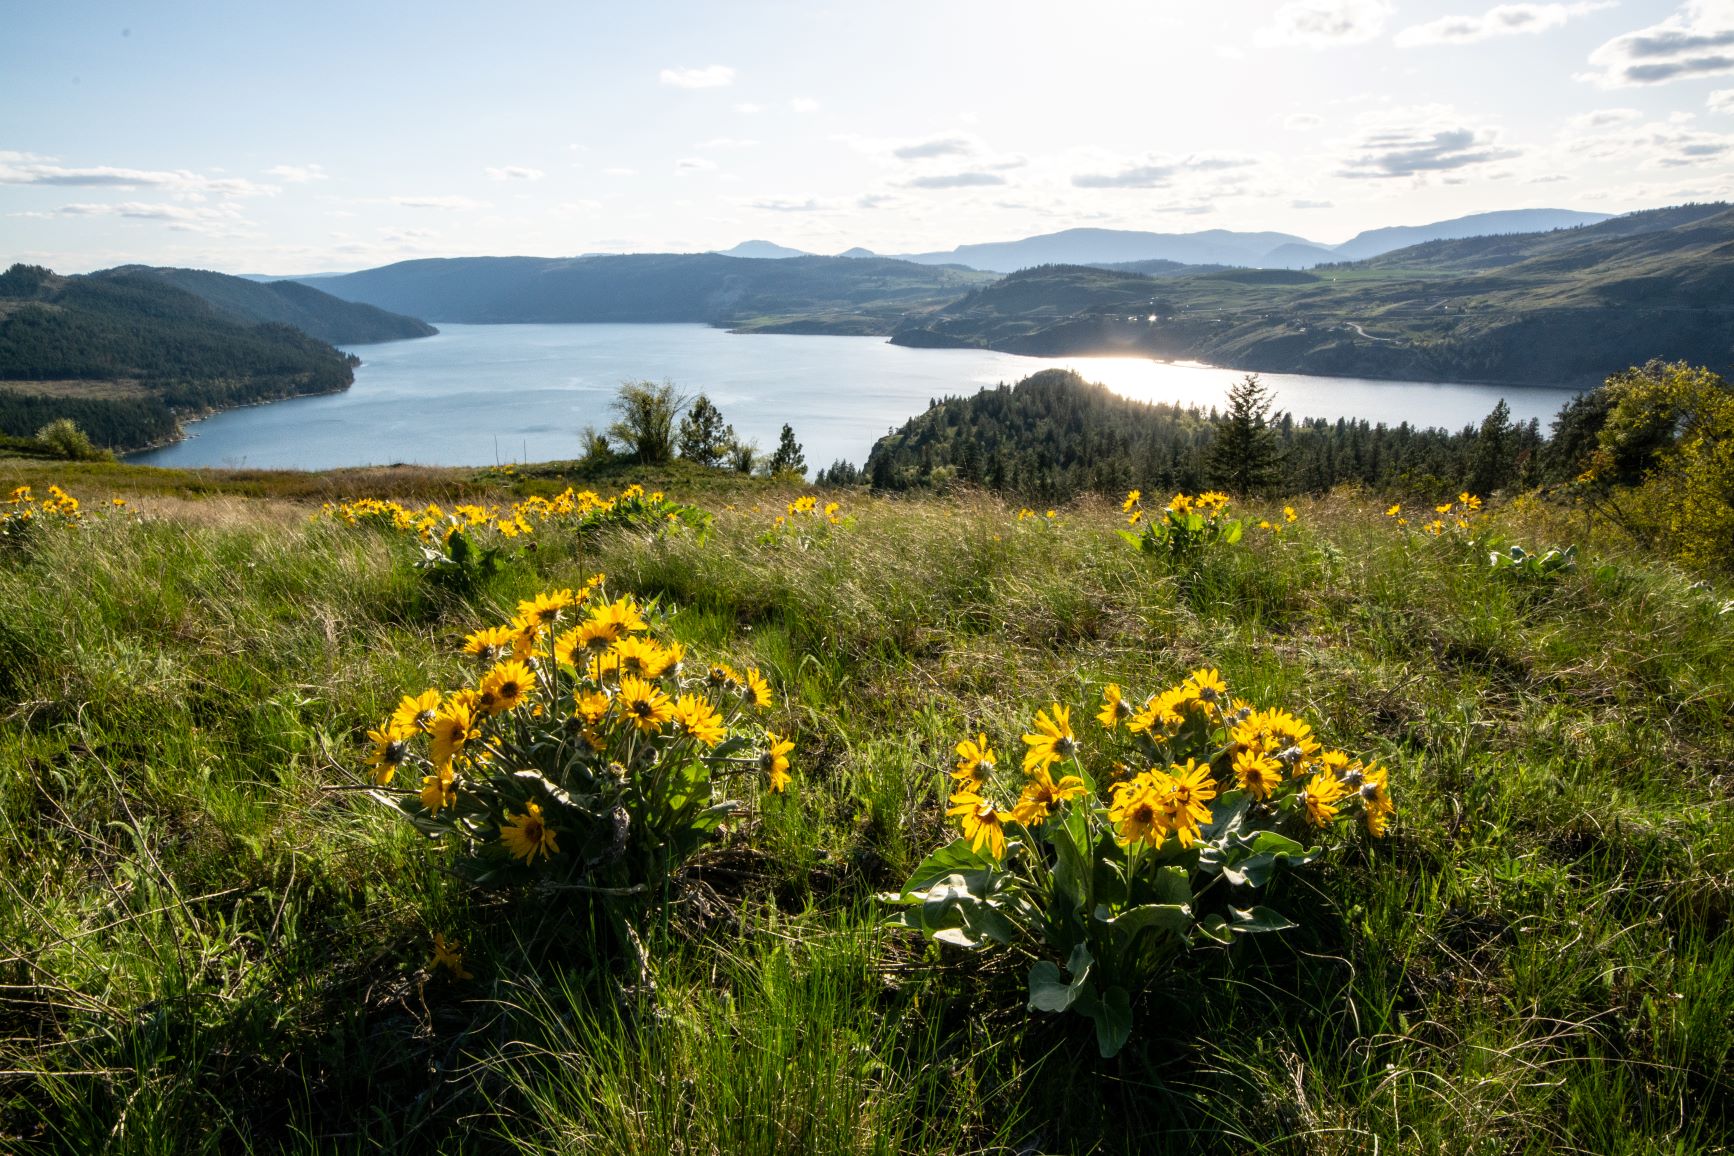 A view do the grasslands overlooking the lake. Photo credit: Destination BC